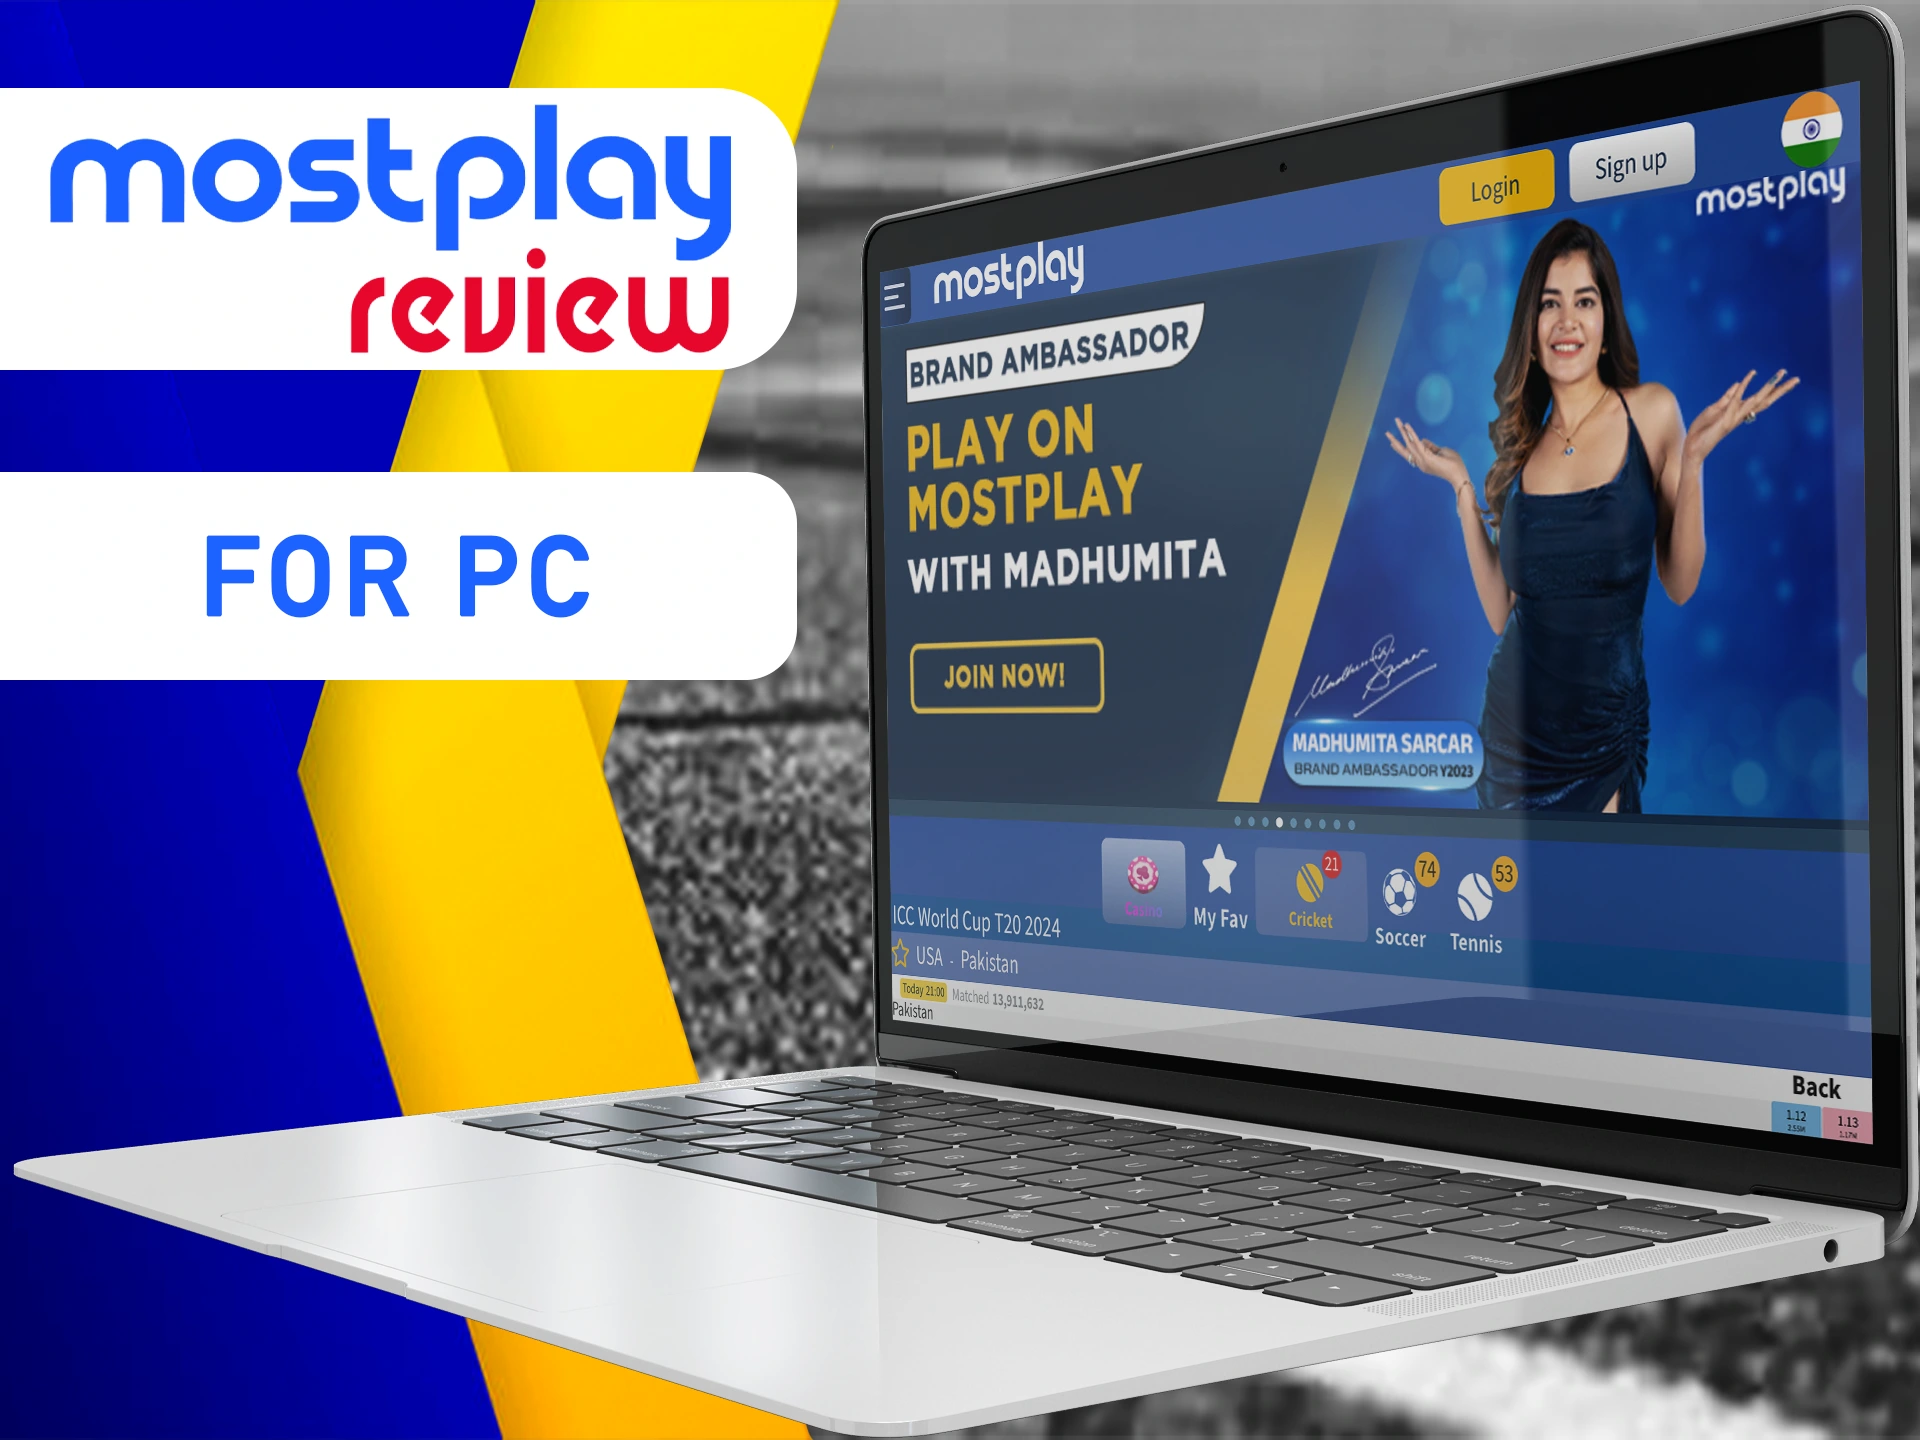 You can use the Mostplay PC version of the website on any computer.